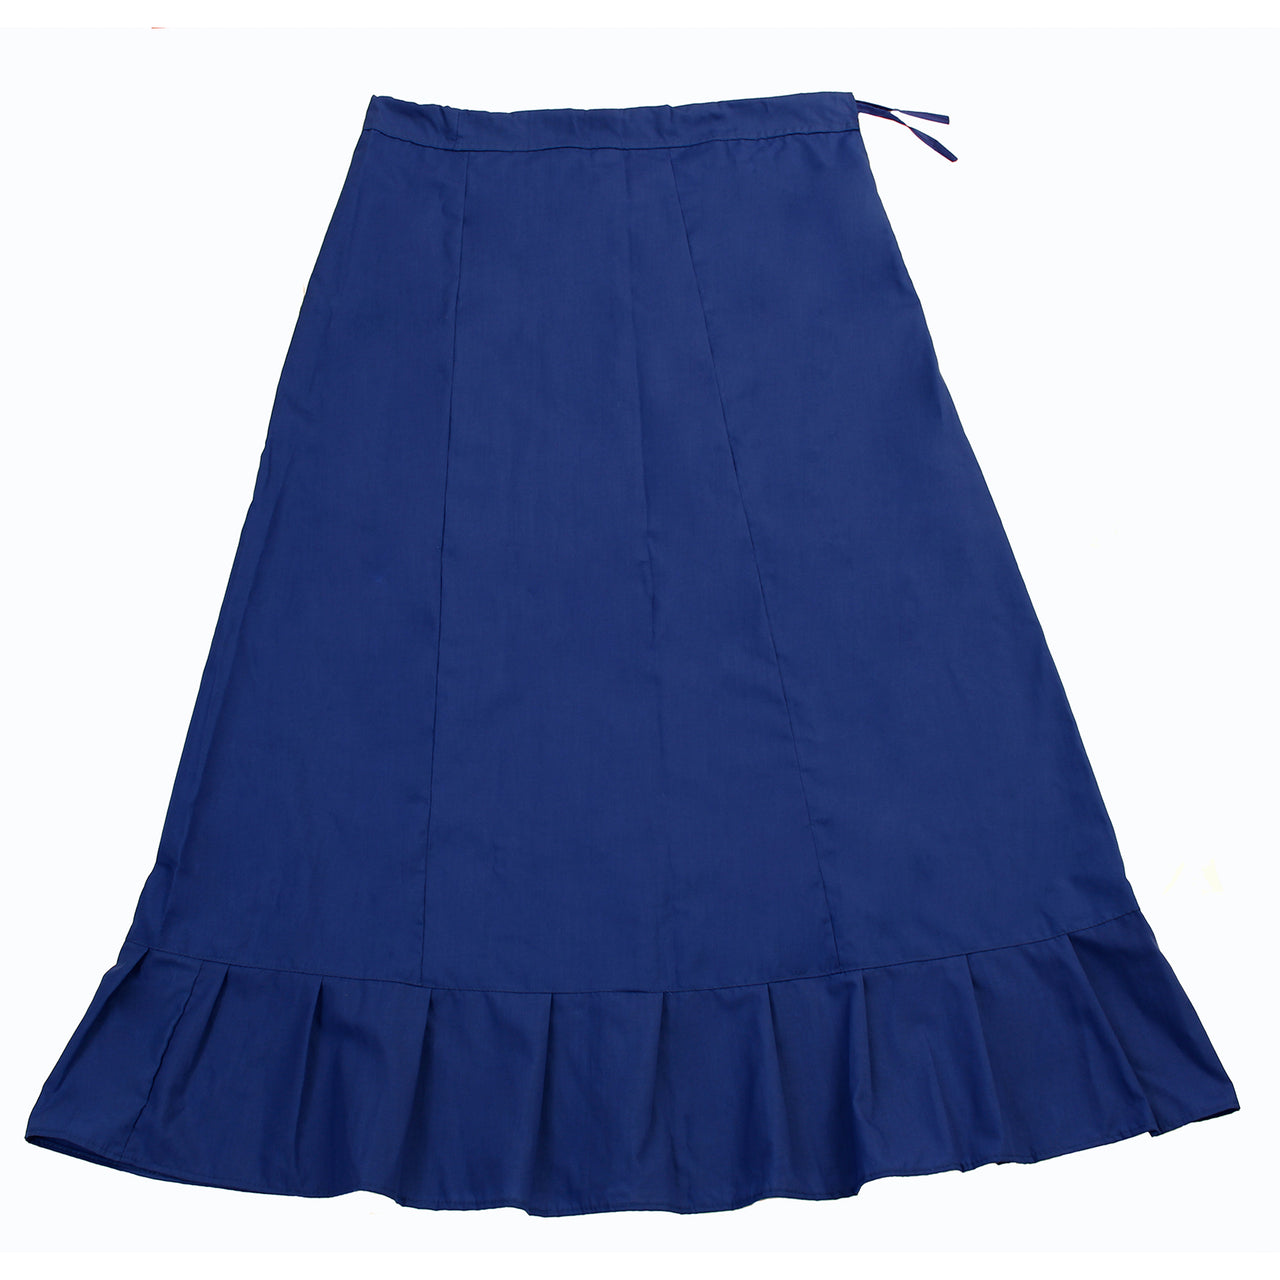 Royal Blue - Sari (Saree) Petticoat - Available in S, M, L & XL - Underskirts For Sari's